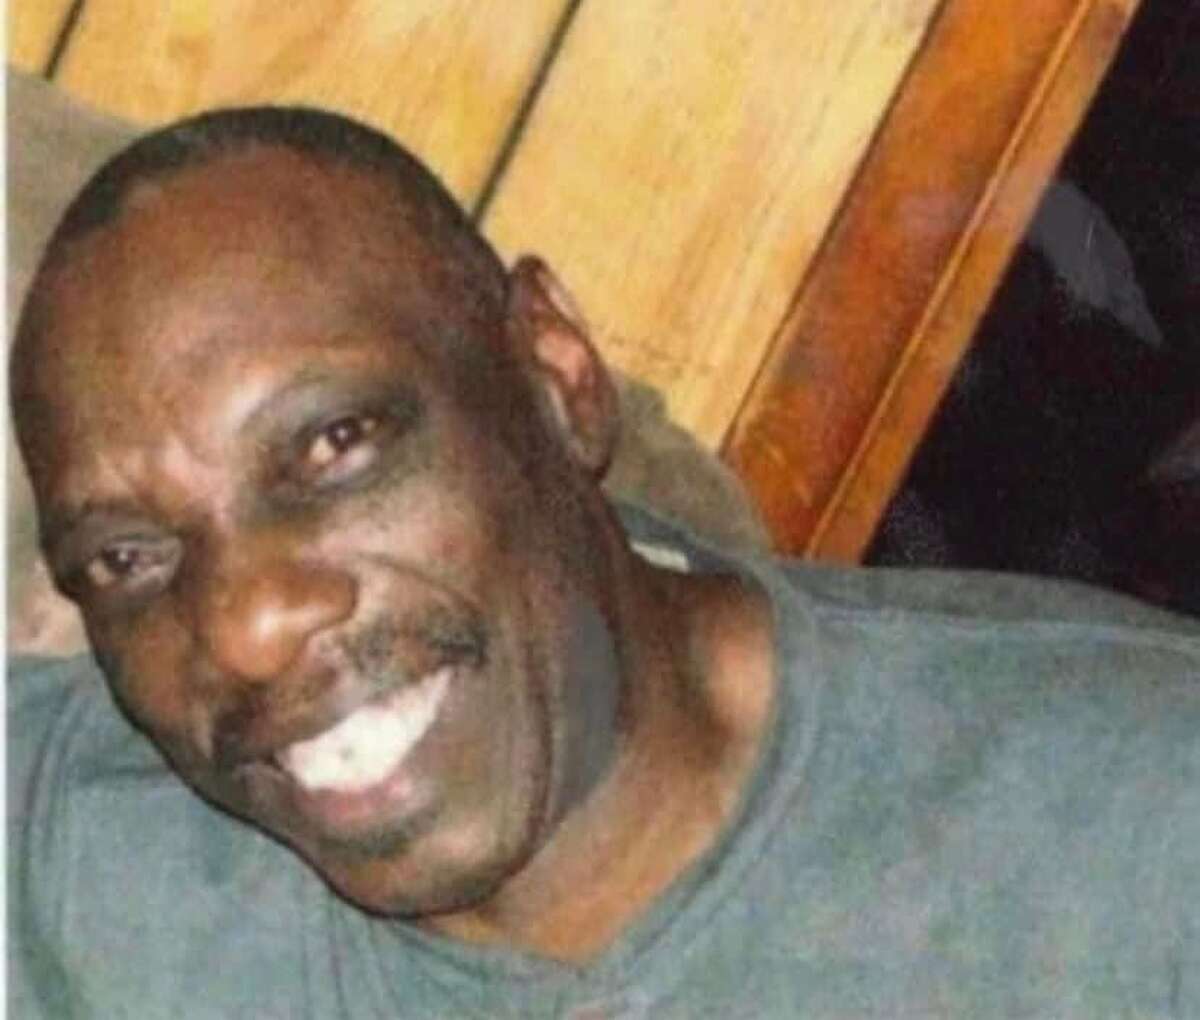 The Beaumont Police Department announced the family will host a balloon release on Saturday to honor Edward Theodore Phillips who was last seen on foot in Beaumont in October 2021. The public is asked to share his photograph and to contact police with any information about the missing senior.